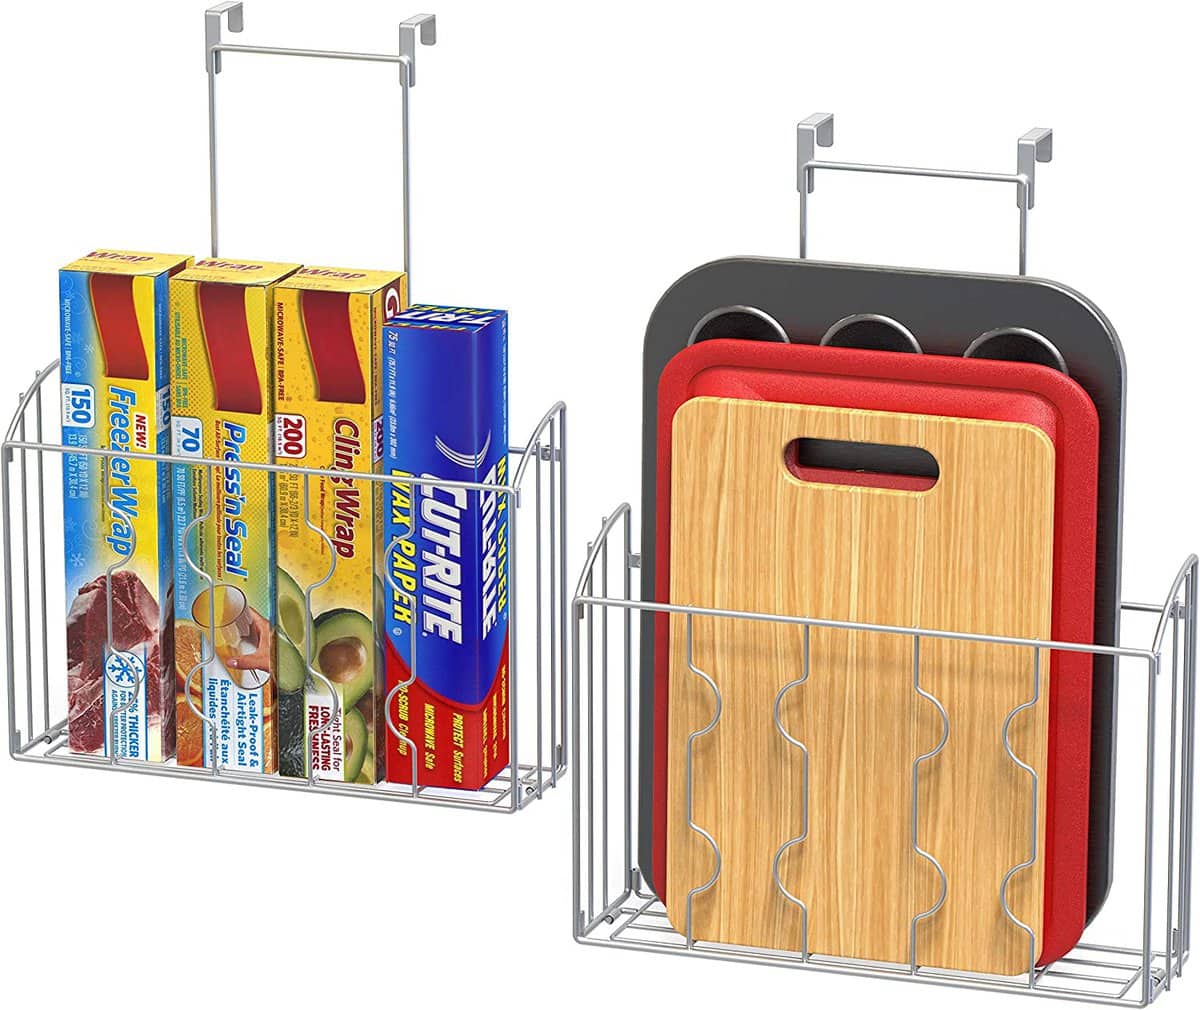 Kitchen organization ideas - Two metal organizers with hooks that hang over the cabinet doors, holding saran wrap boxes and cutting boards.